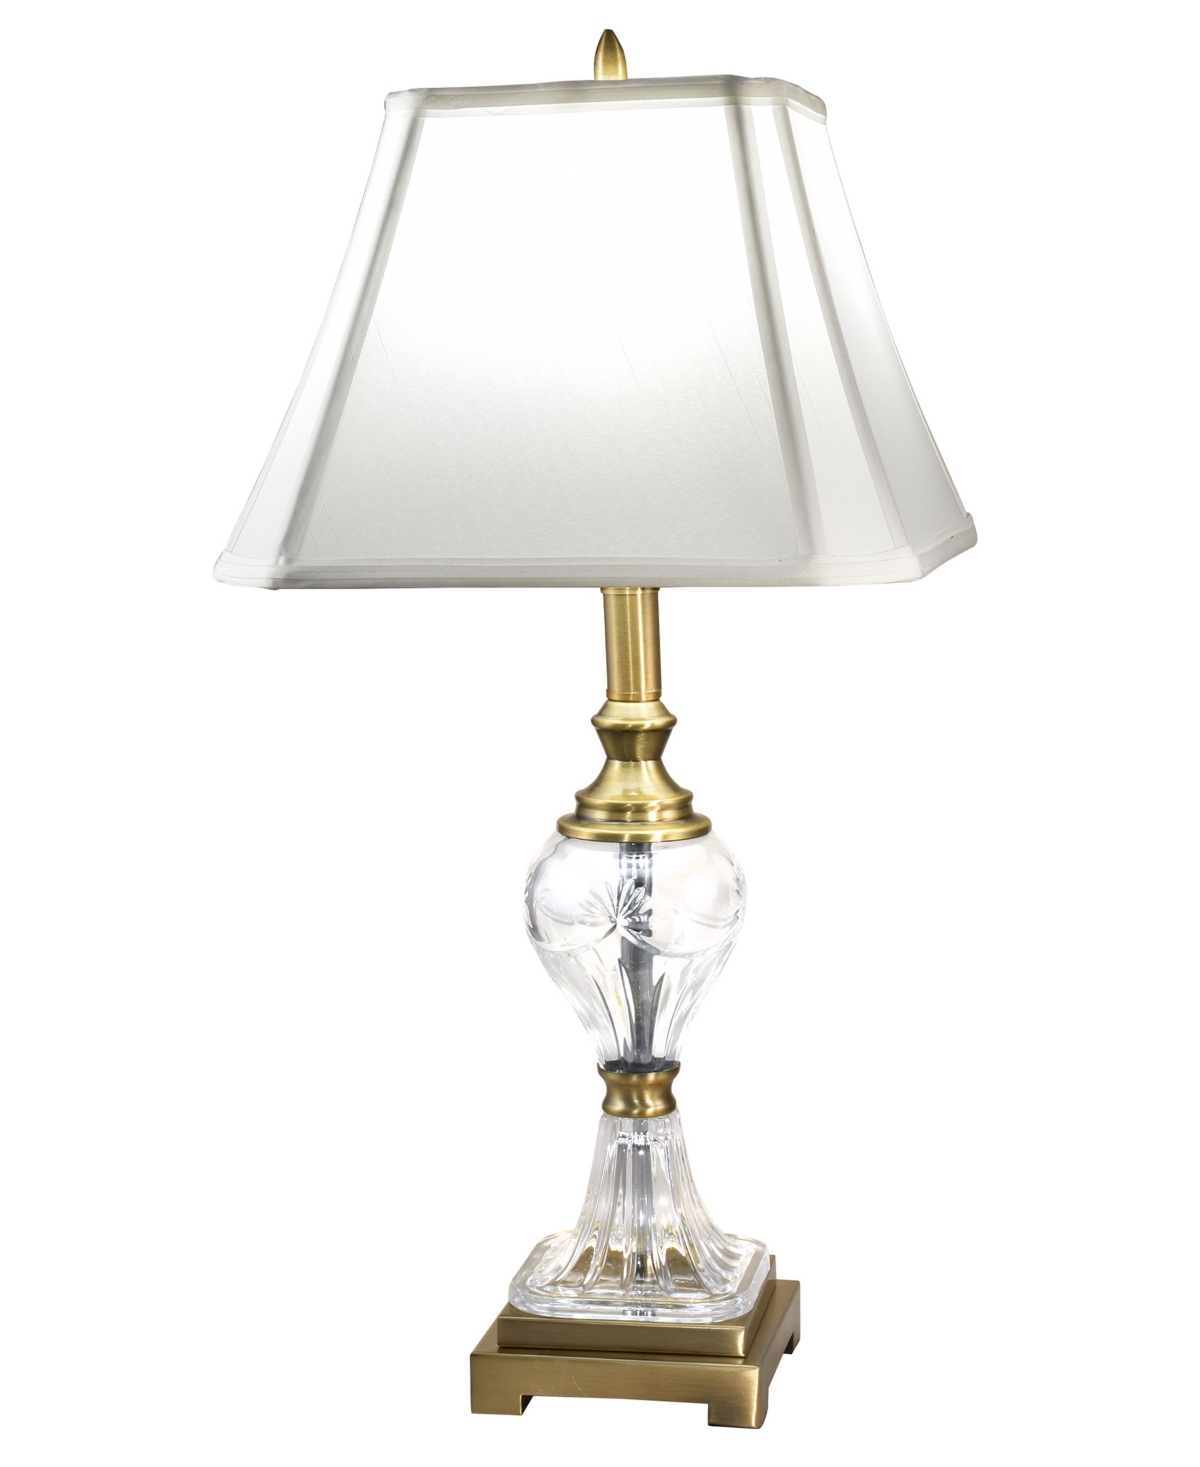 Dale Tiffany Arie Lead Hand Cut Crystal Table Lamp In Clear